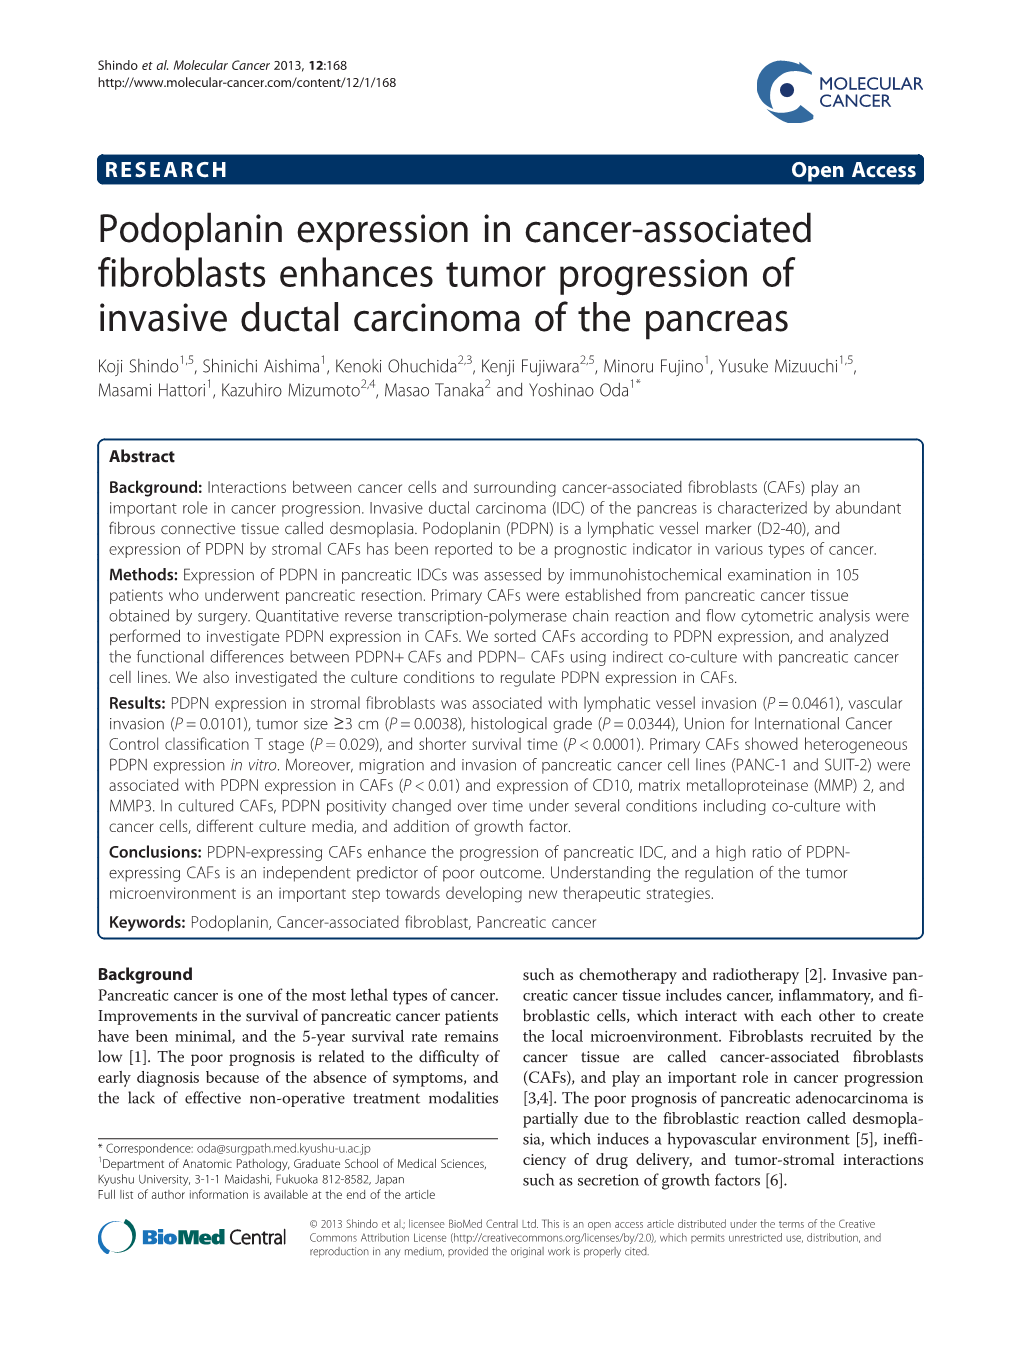 Podoplanin Expression in Cancer-Associated Fibroblasts